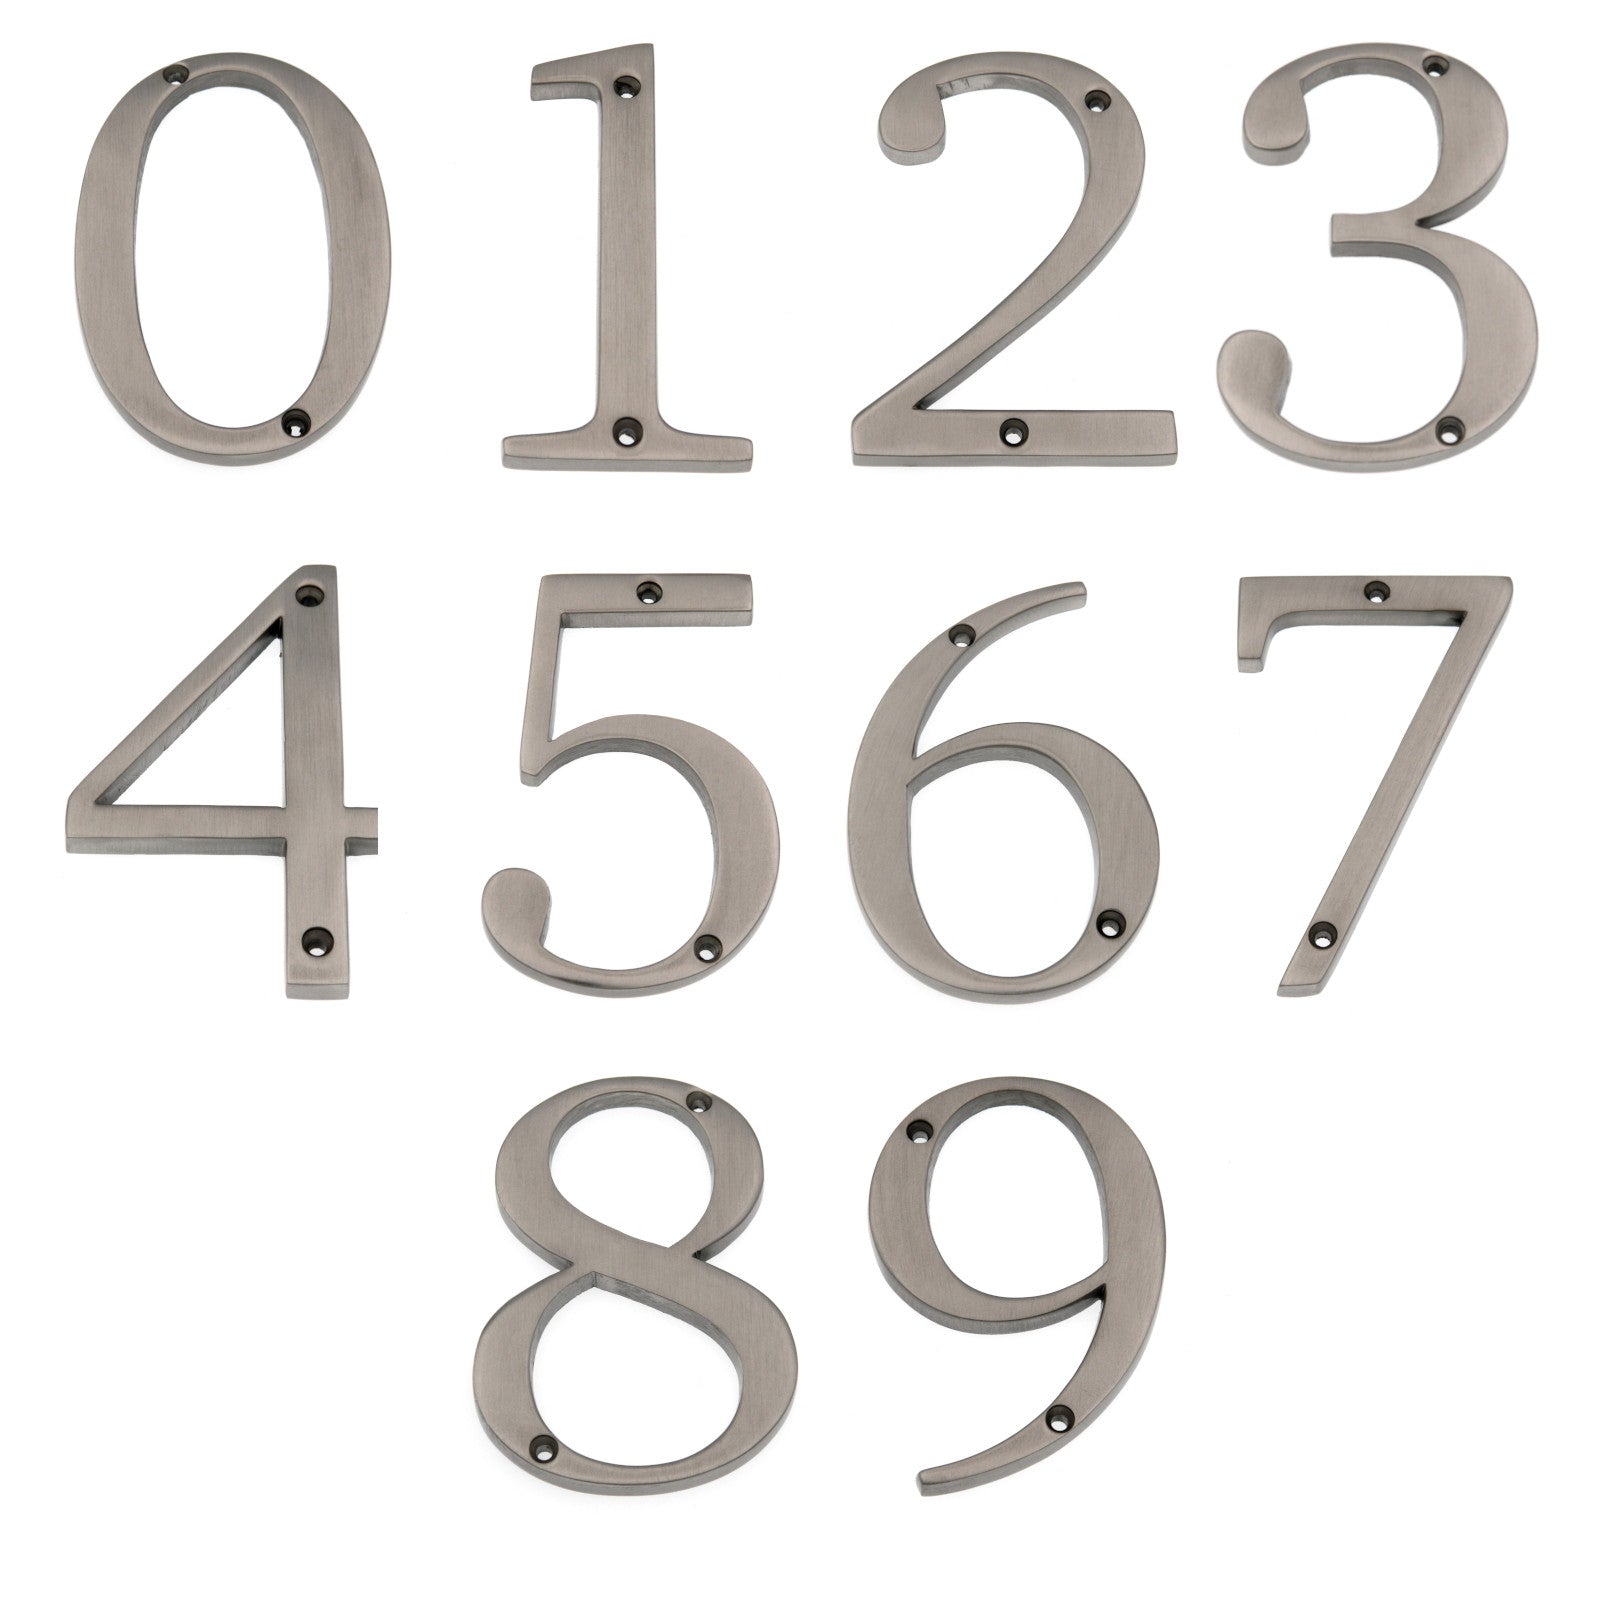 Satin Nickel Metal 4 inch Flush House Address Numbers, Bold Readable Font